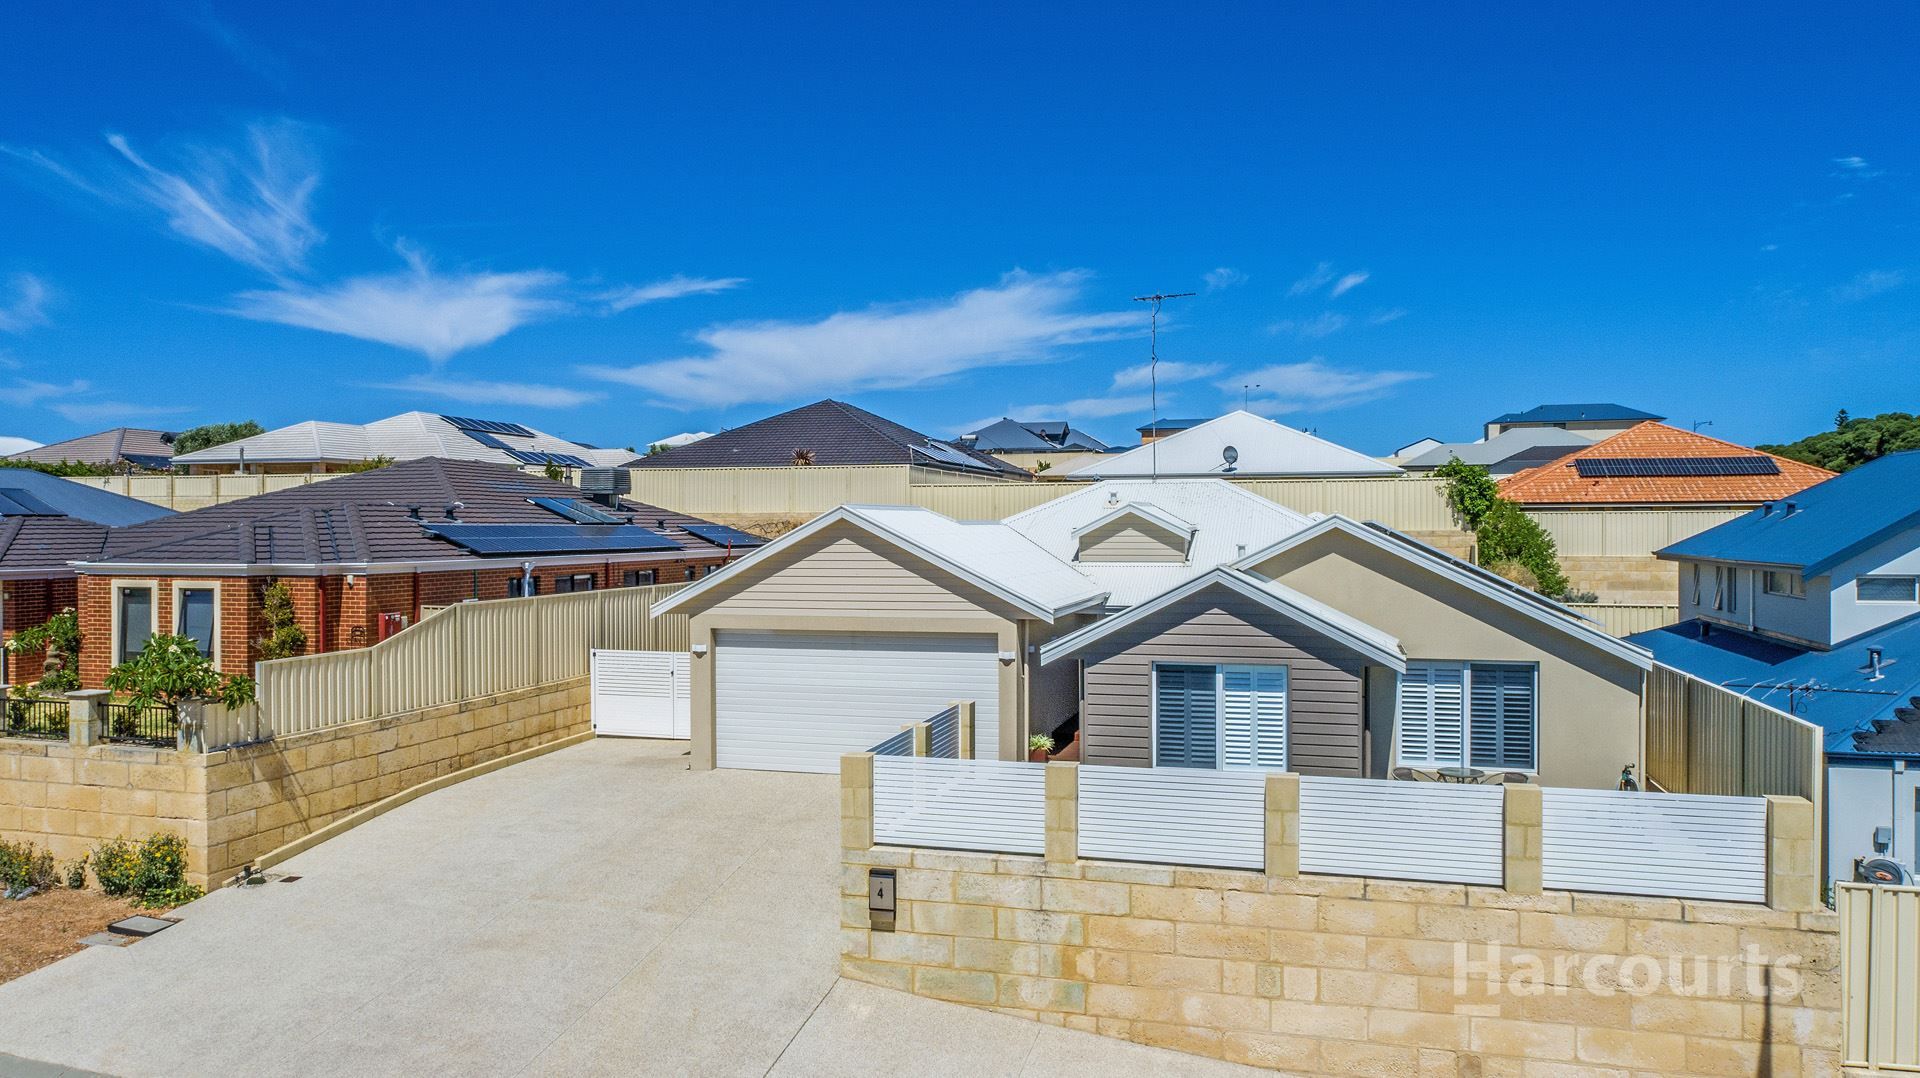 4 bedrooms House in 4 Quairading Rise DAWESVILLE WA, 6211